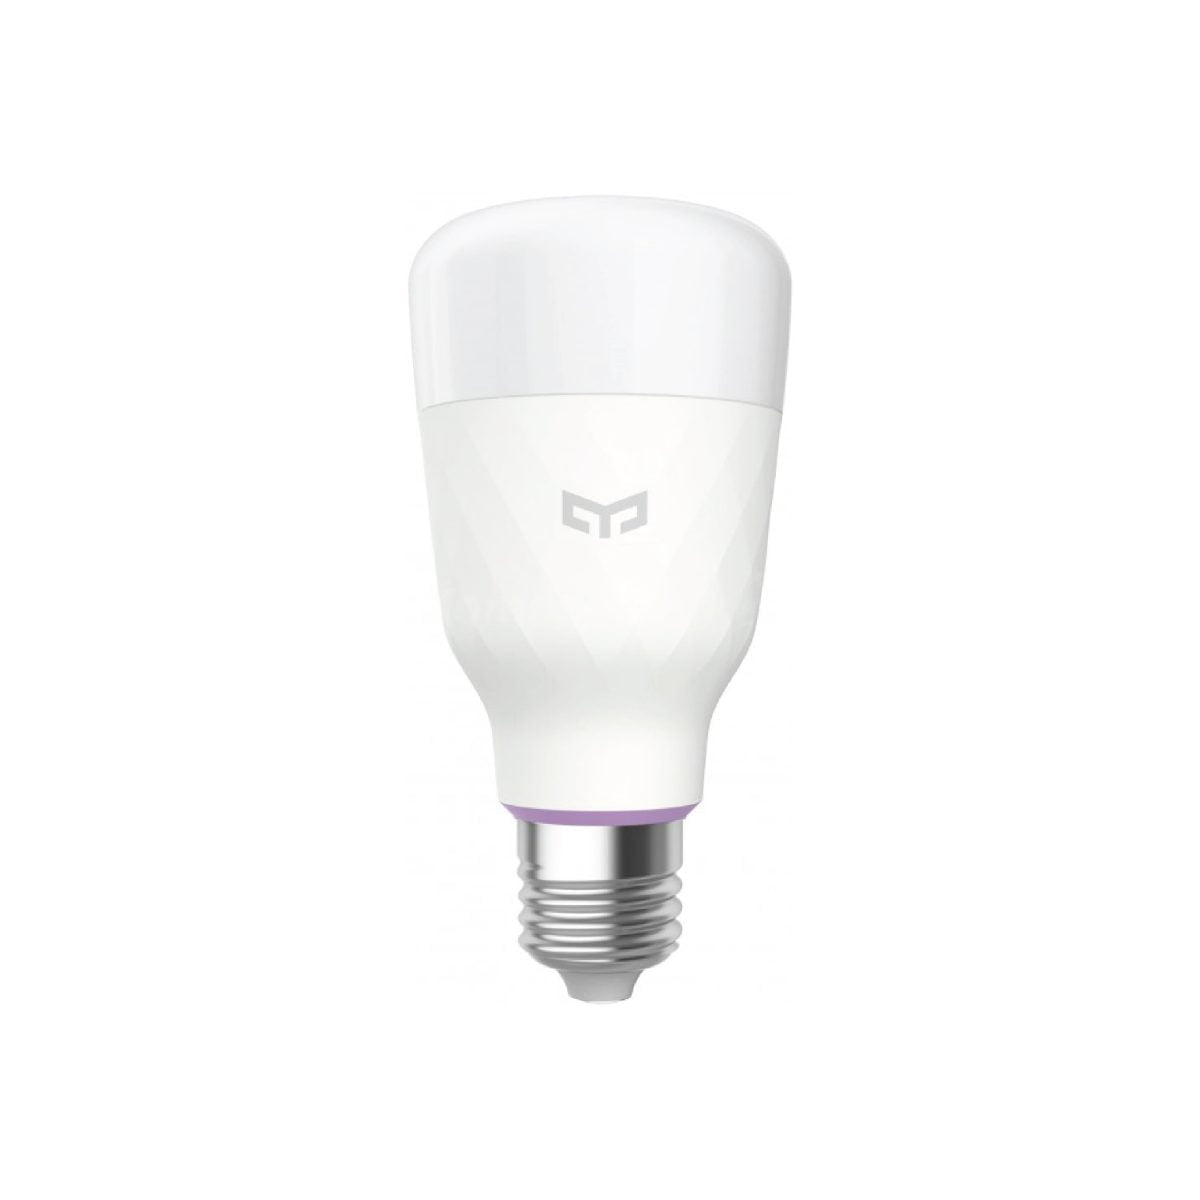 Bulb 26 Xiaomi The Yeelight 1S Rgb Smart Light Bulb Will Allow You To Create Your Own Smart Home. You Can Control It With Your Voice Or Application And Decide With What Temperature And Power It Should Shine. Luminous Flux: 800Lm Color Temperature: 1700K-6500K Lamp Holder: E27 Rated Power: 8.5W &Nbsp; 16 Million Colors Wifi Enabled, Voice Control, App Control, Music Sync &Lt;Img Class=&Quot;Alignnone Wp-Image-8061 Size-Full&Quot; Src=&Quot;Https://Lablaab.com/Wp-Content/Uploads/2020/04/Bulb-27-2-Scaled.jpg&Quot; Alt=&Quot;&Quot; Width=&Quot;2560&Quot; Height=&Quot;357&Quot; /&Gt; &Nbsp; Yeelight Smart Bulb 1S (Color)